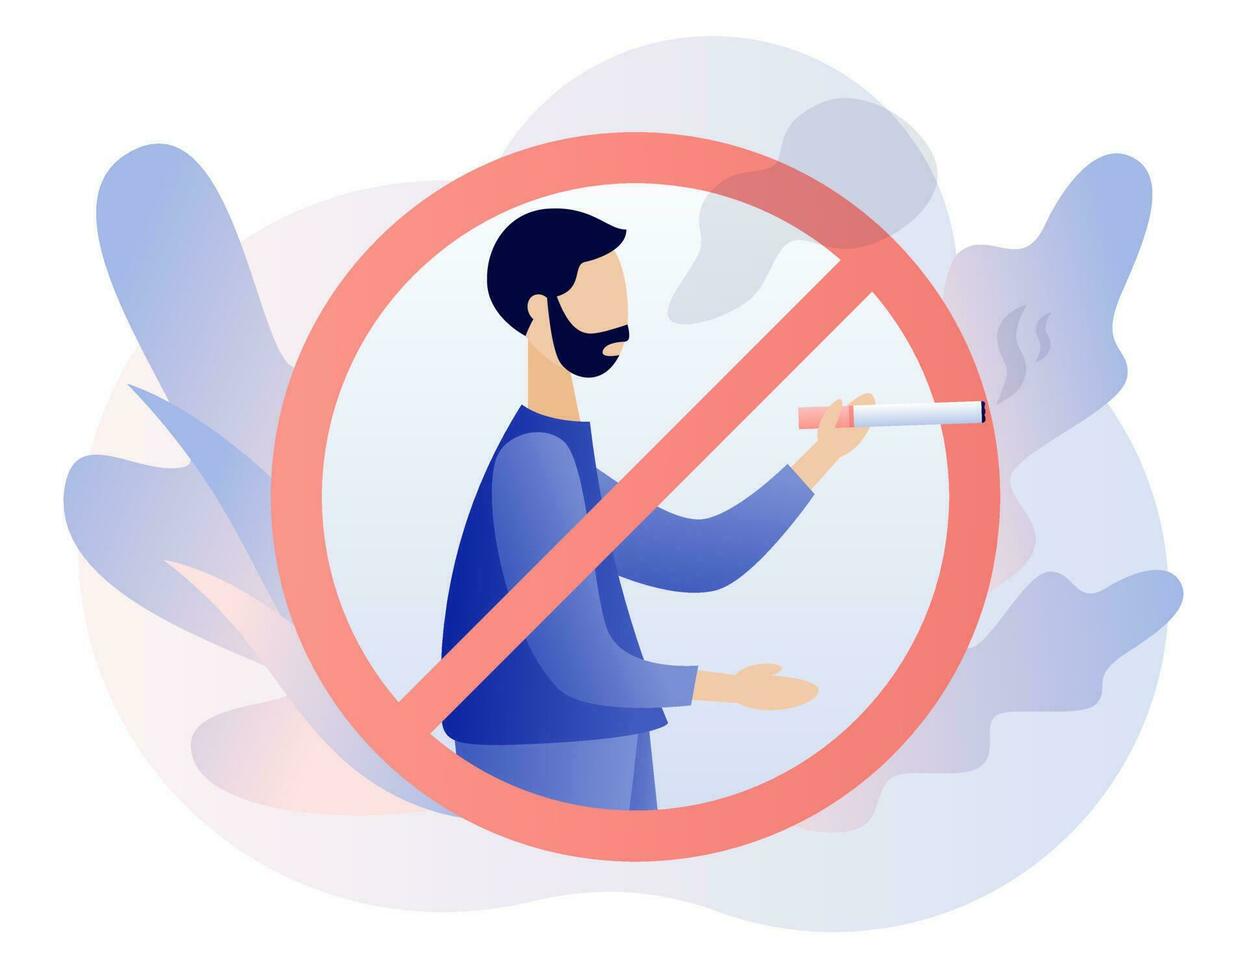 No smoking sign. Rejection of nicotine, stop smoke, healthy habits. Crossed out smoker with cigarette. Modern flat cartoon style. Vector illustration on white background